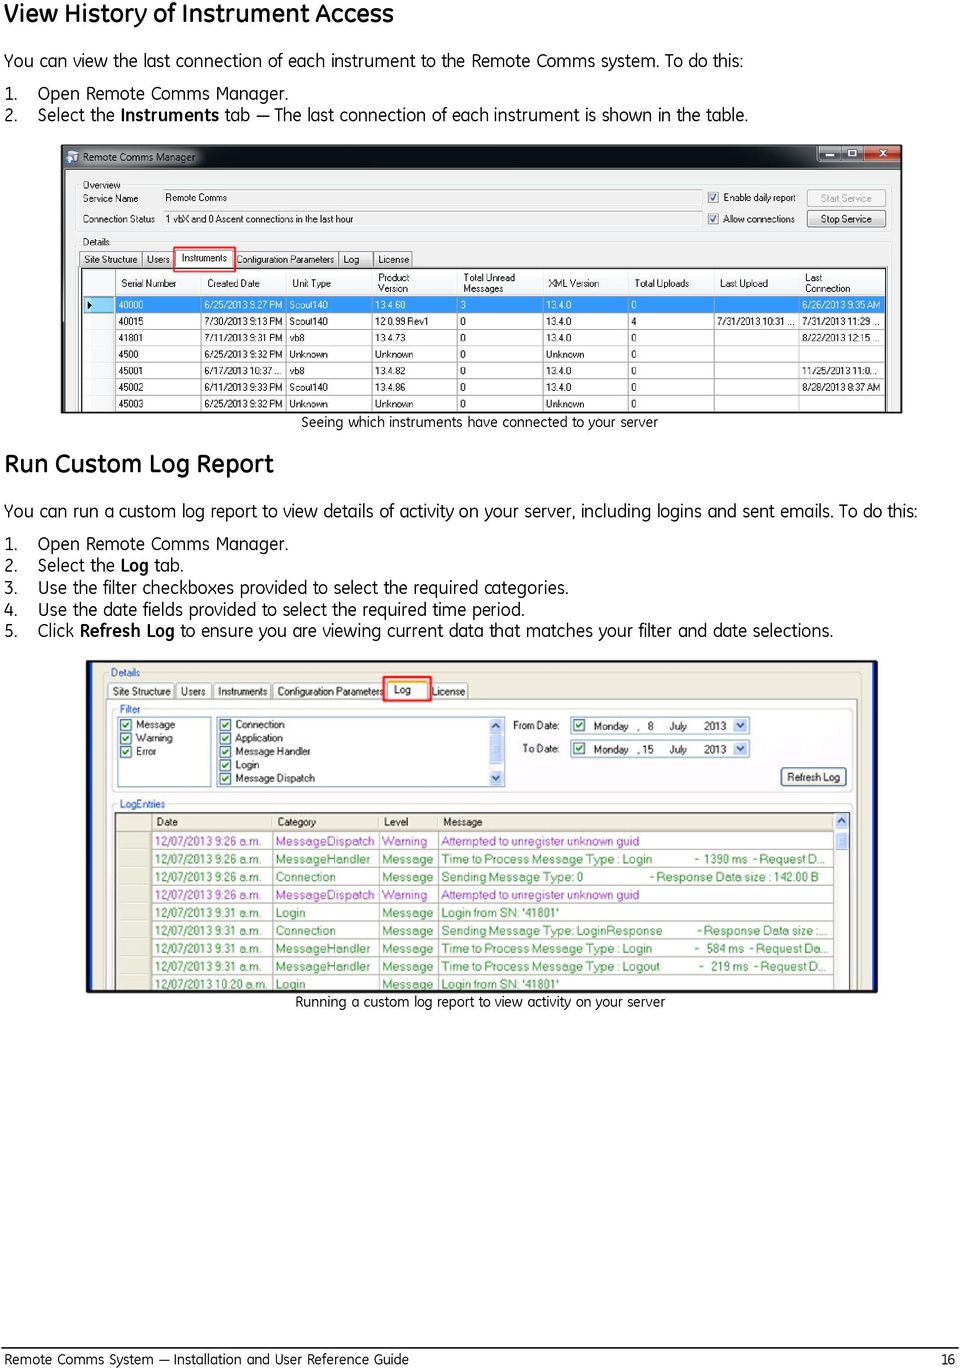 Run Custom Log Report Seeing which instruments have connected to your server You can run a custom log report to view details of activity on your server, including logins and sent emails.